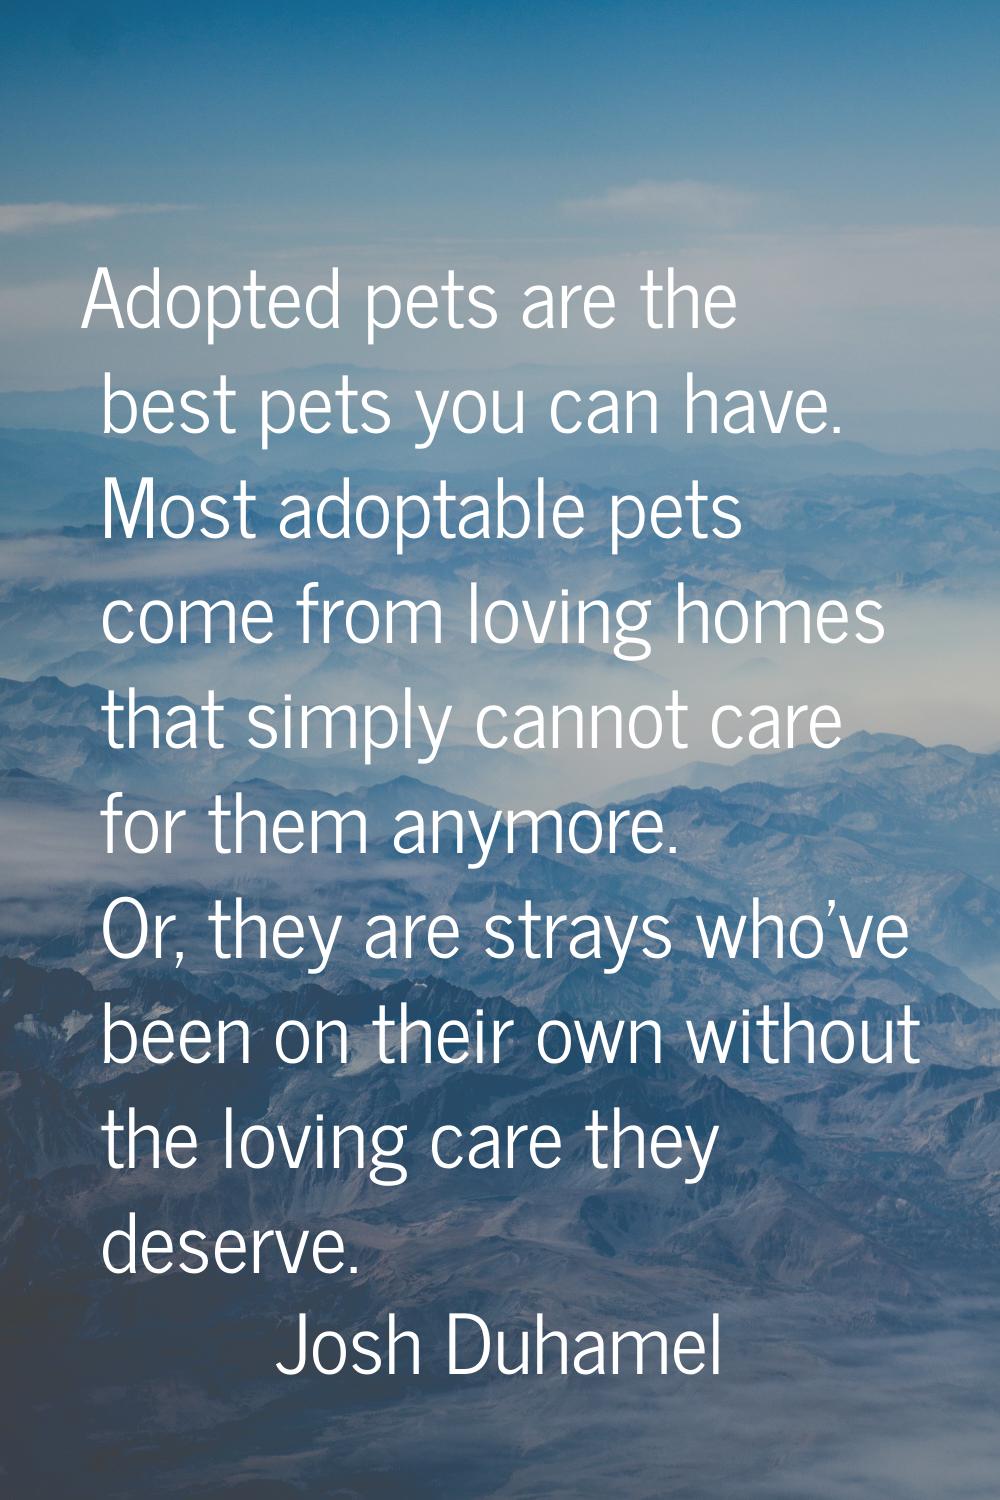 Adopted pets are the best pets you can have. Most adoptable pets come from loving homes that simply